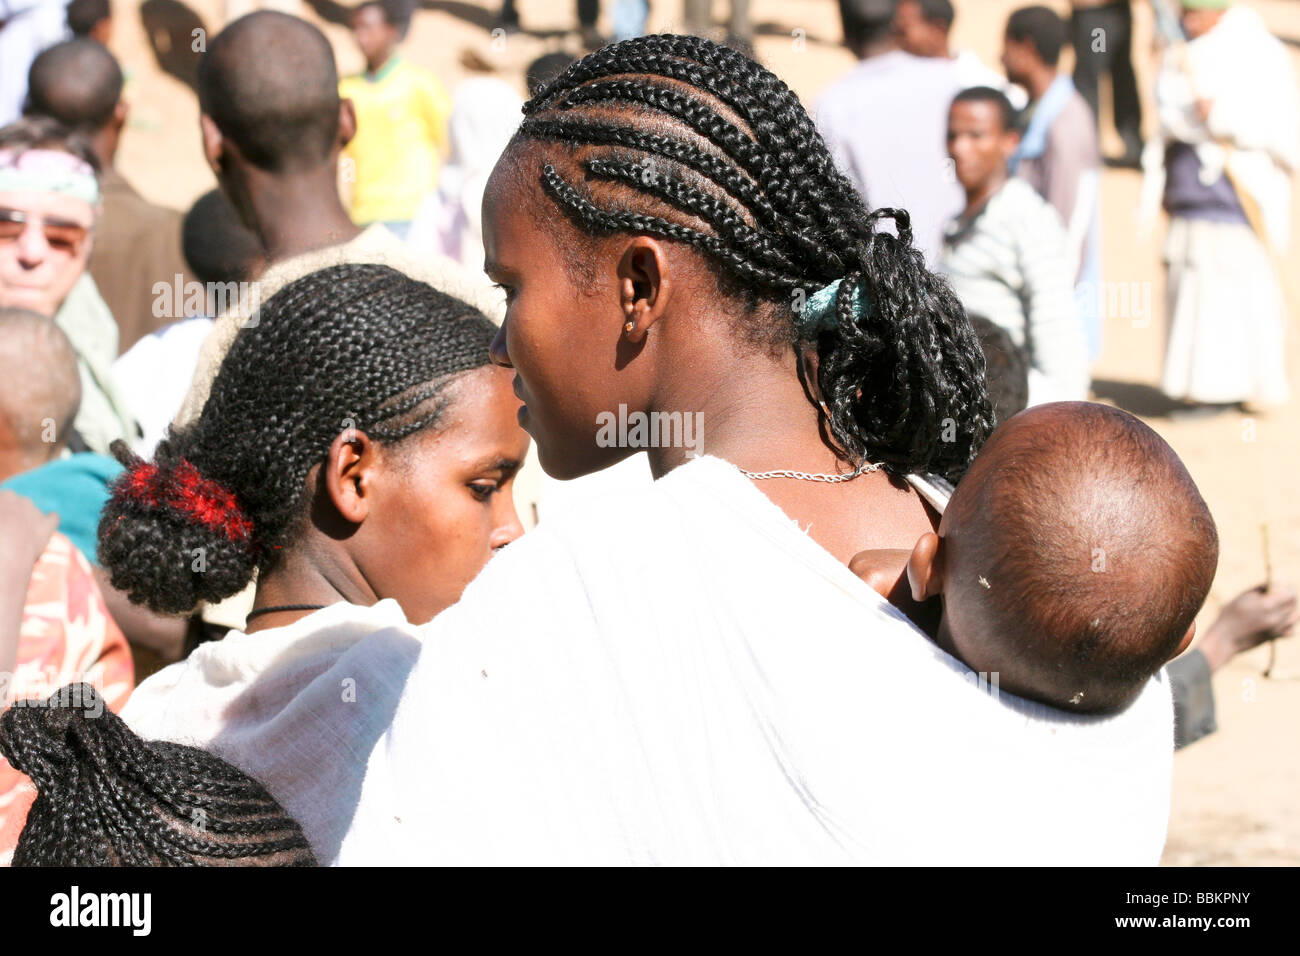 Africa Ethiopia Lalibela woman with Plaited hair and baby on back Stock Photo